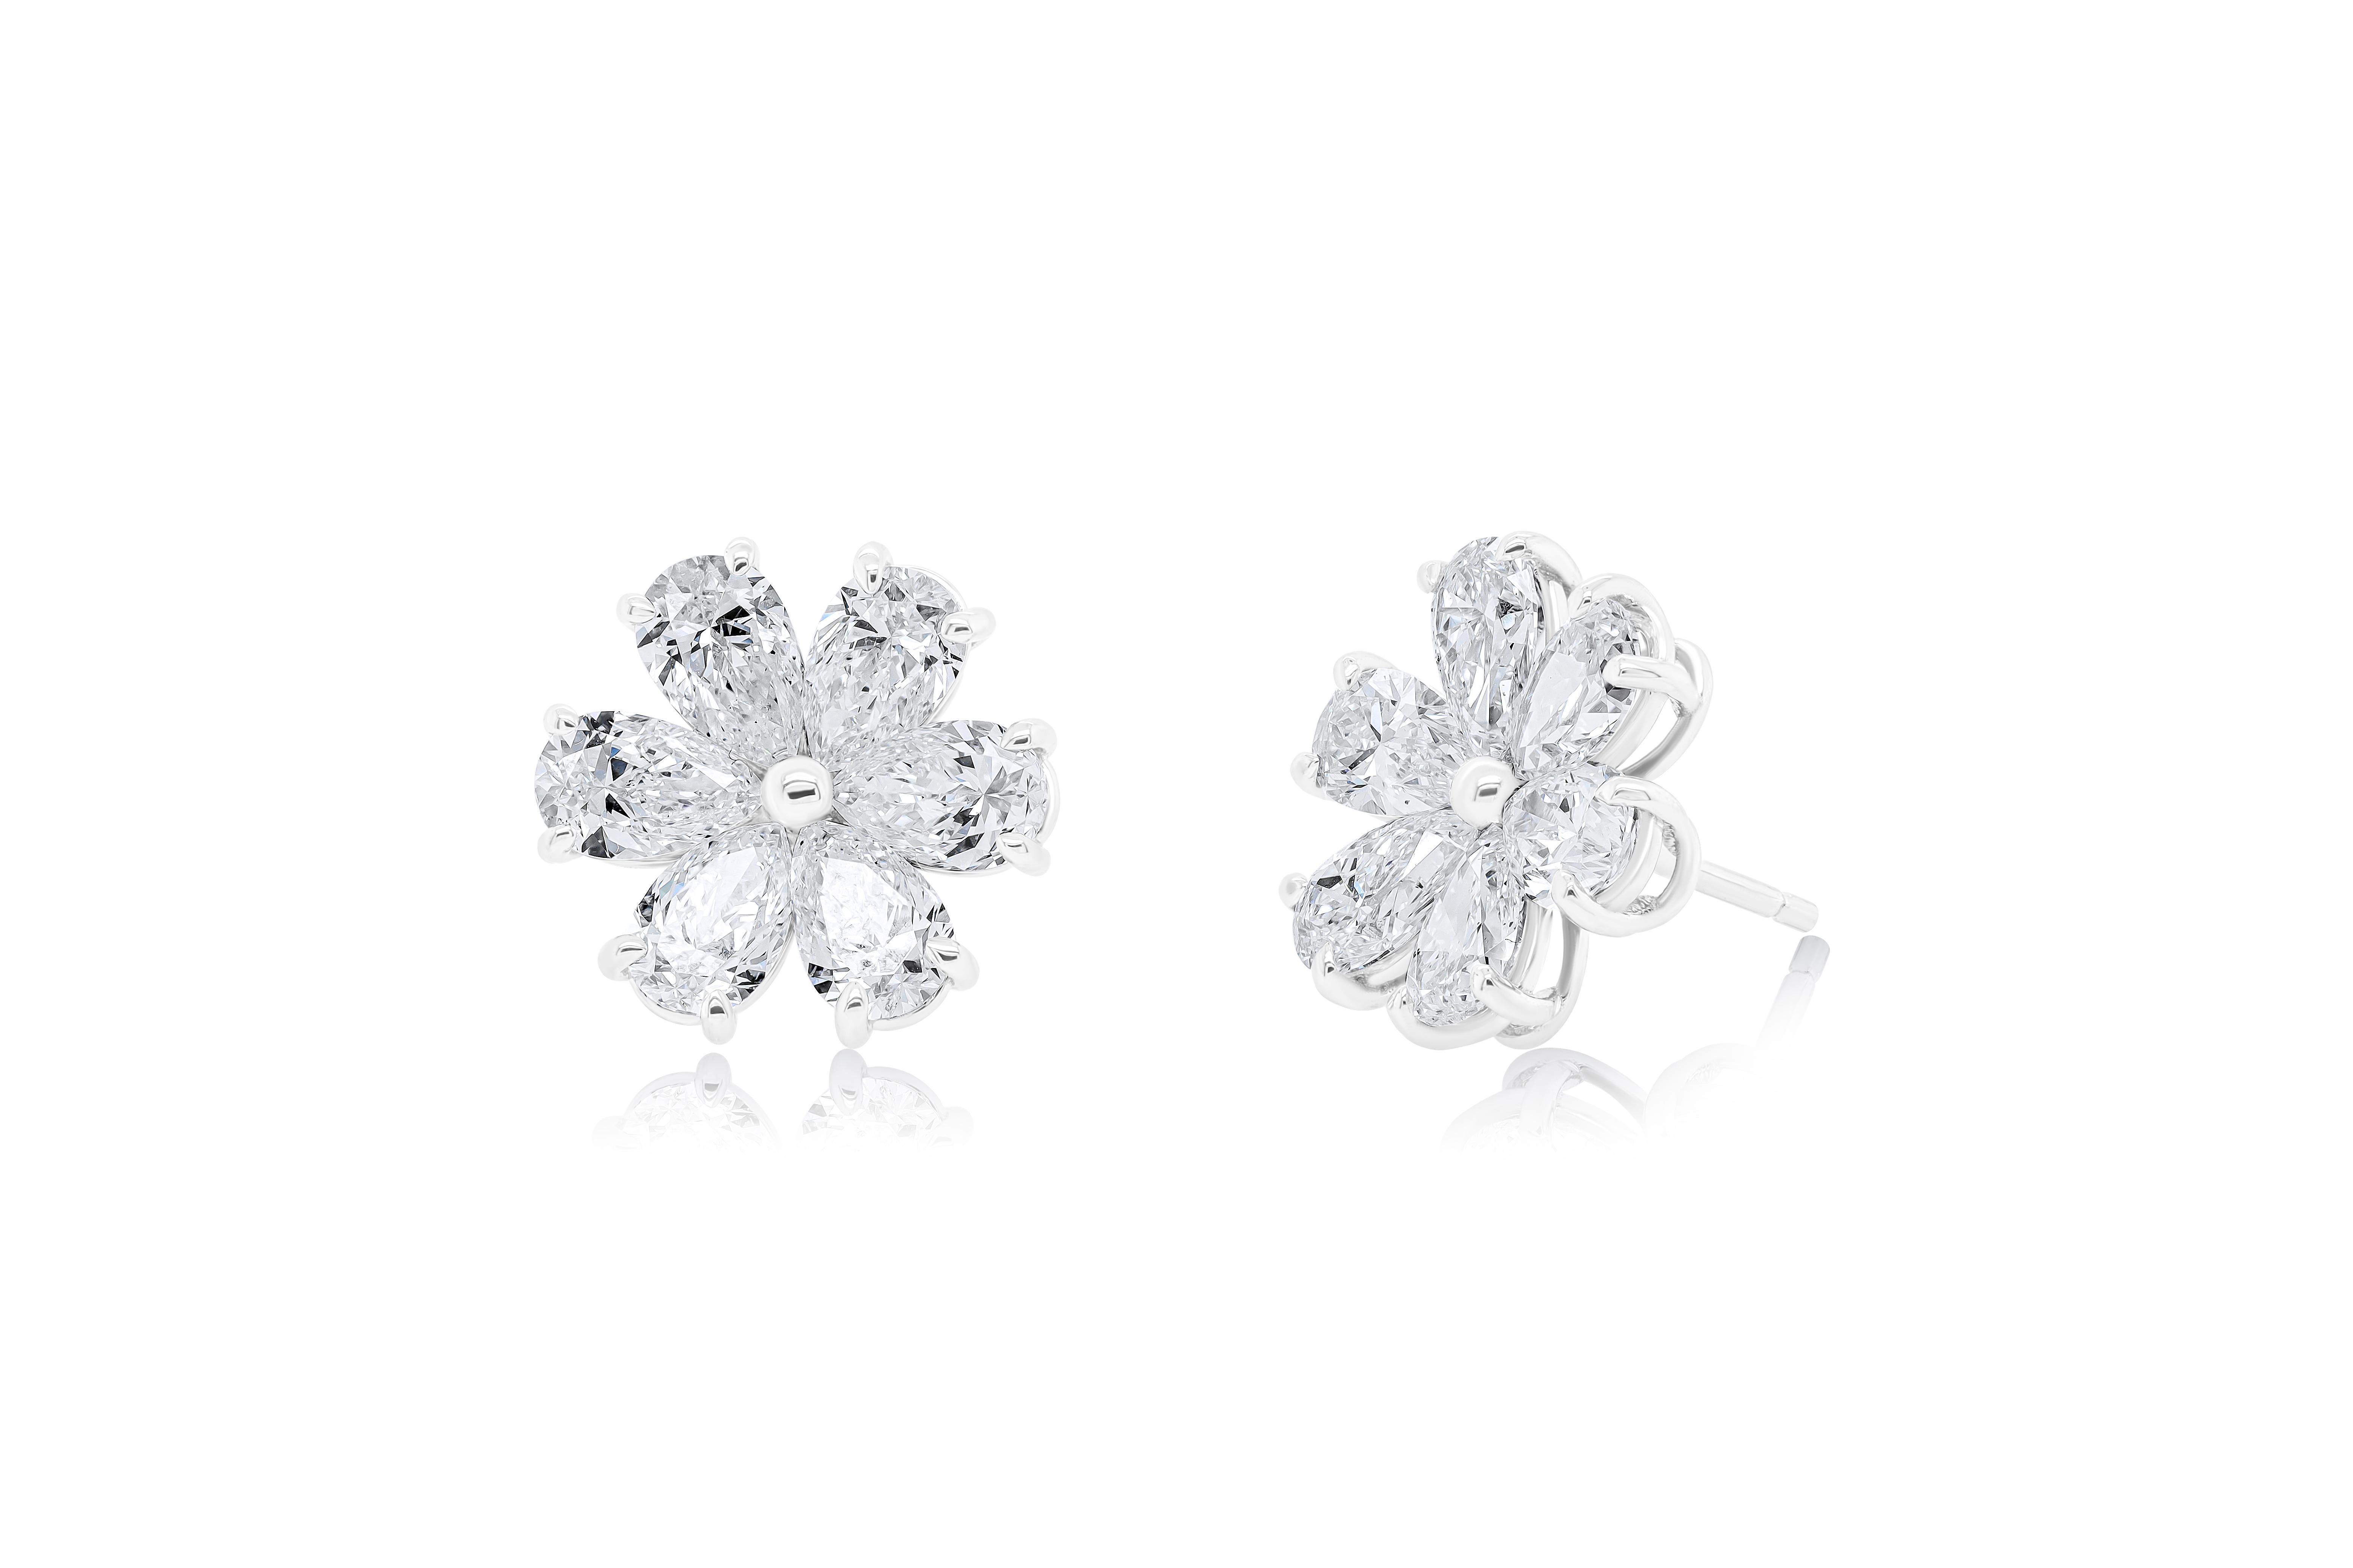 Mixed Cut Diana M. 6.05 Carat Flower Cluster Diamond Earrings For Sale